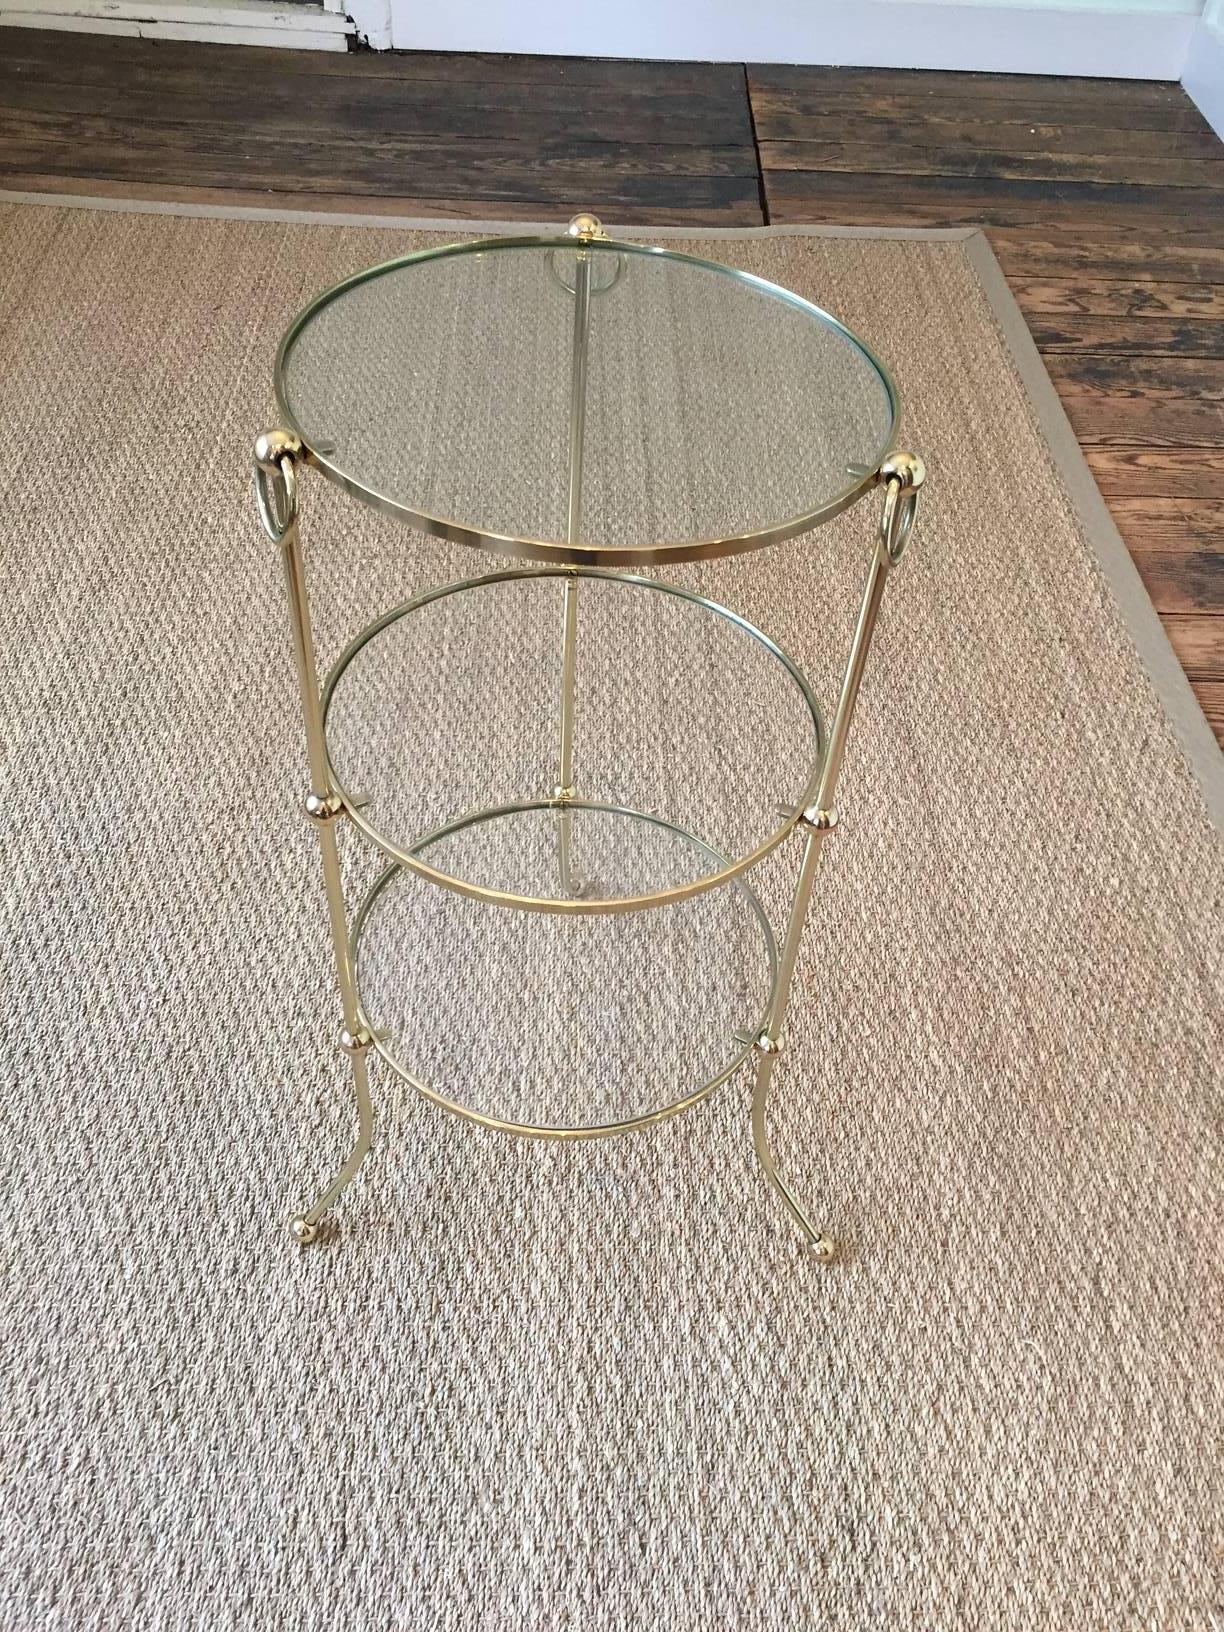 Italian Brass Campaign Style Three-Tier Side Table 1